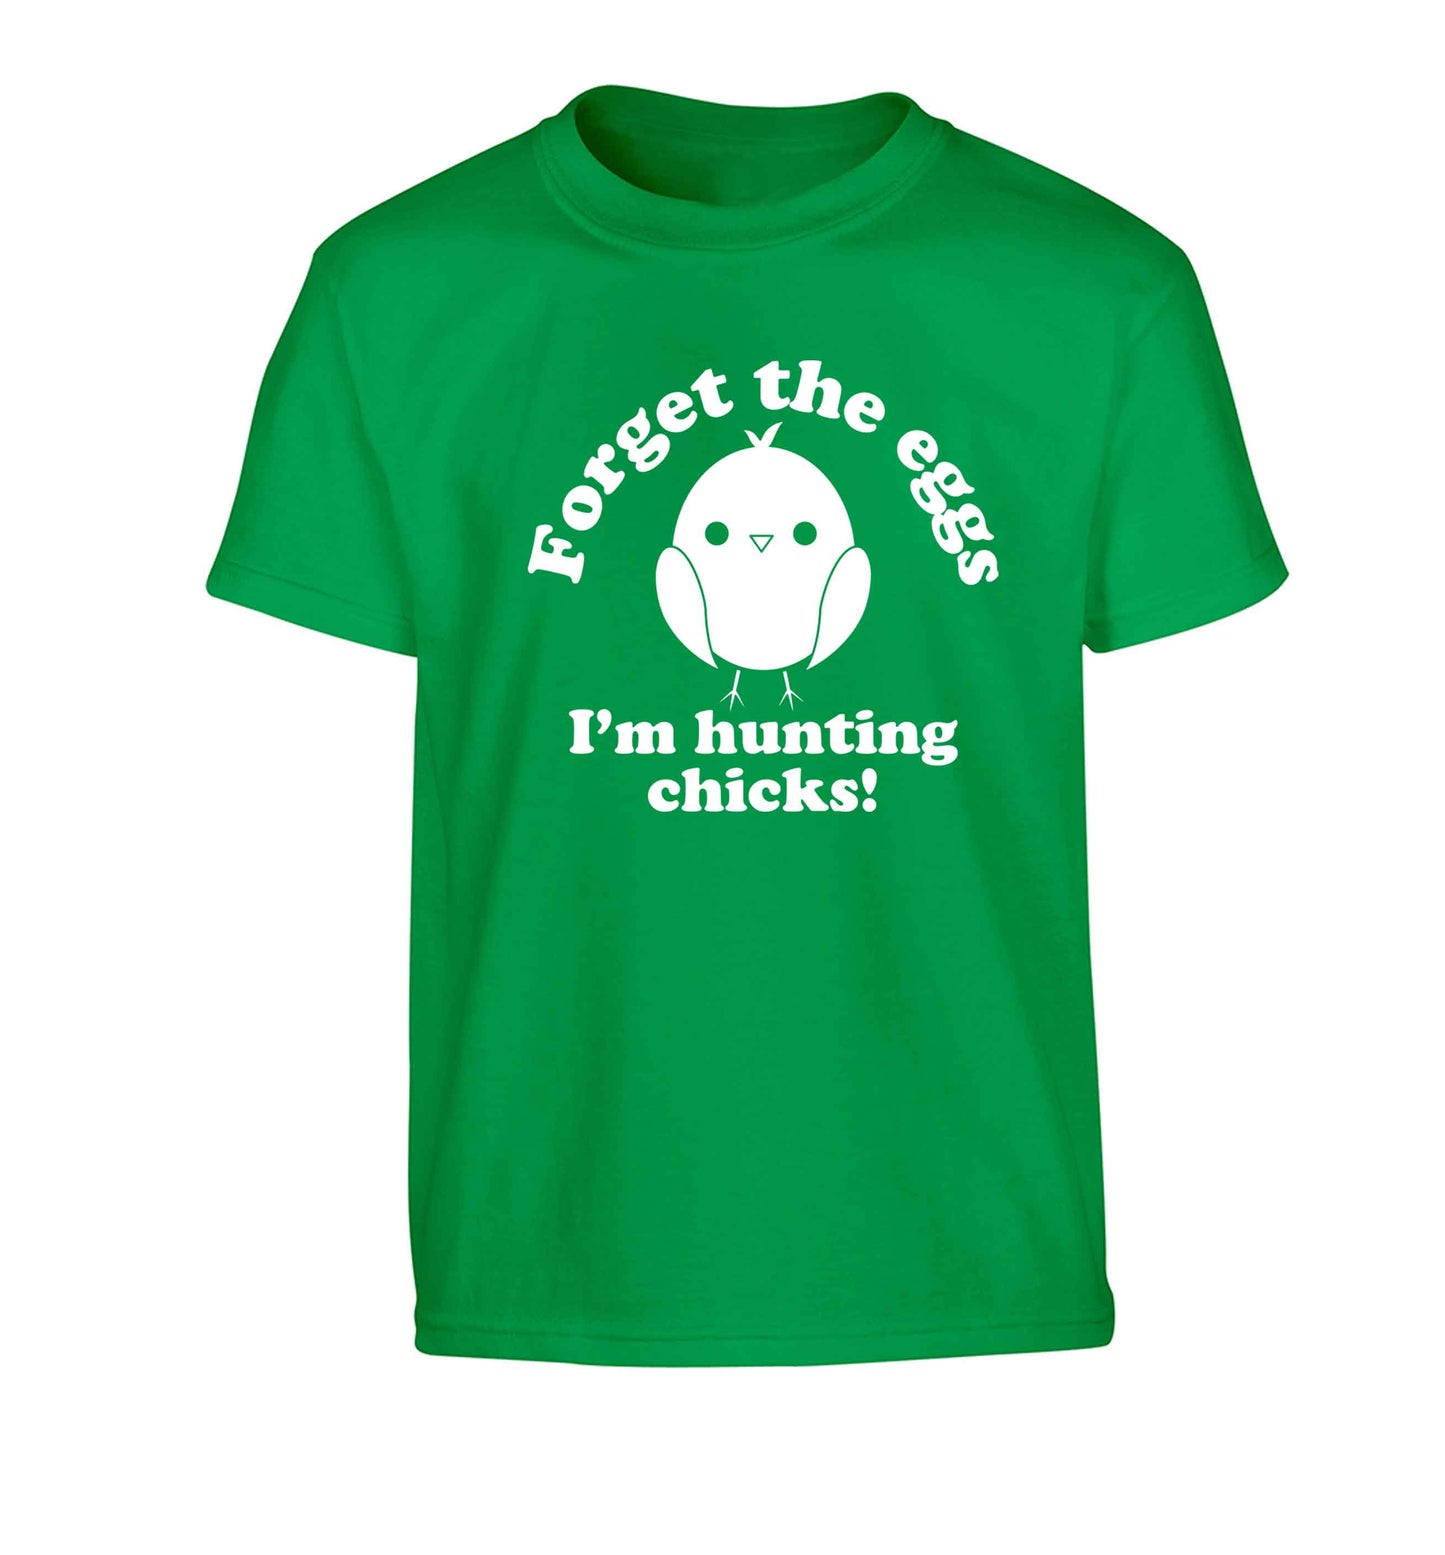 Forget the eggs I'm hunting chicks! Children's green Tshirt 12-13 Years